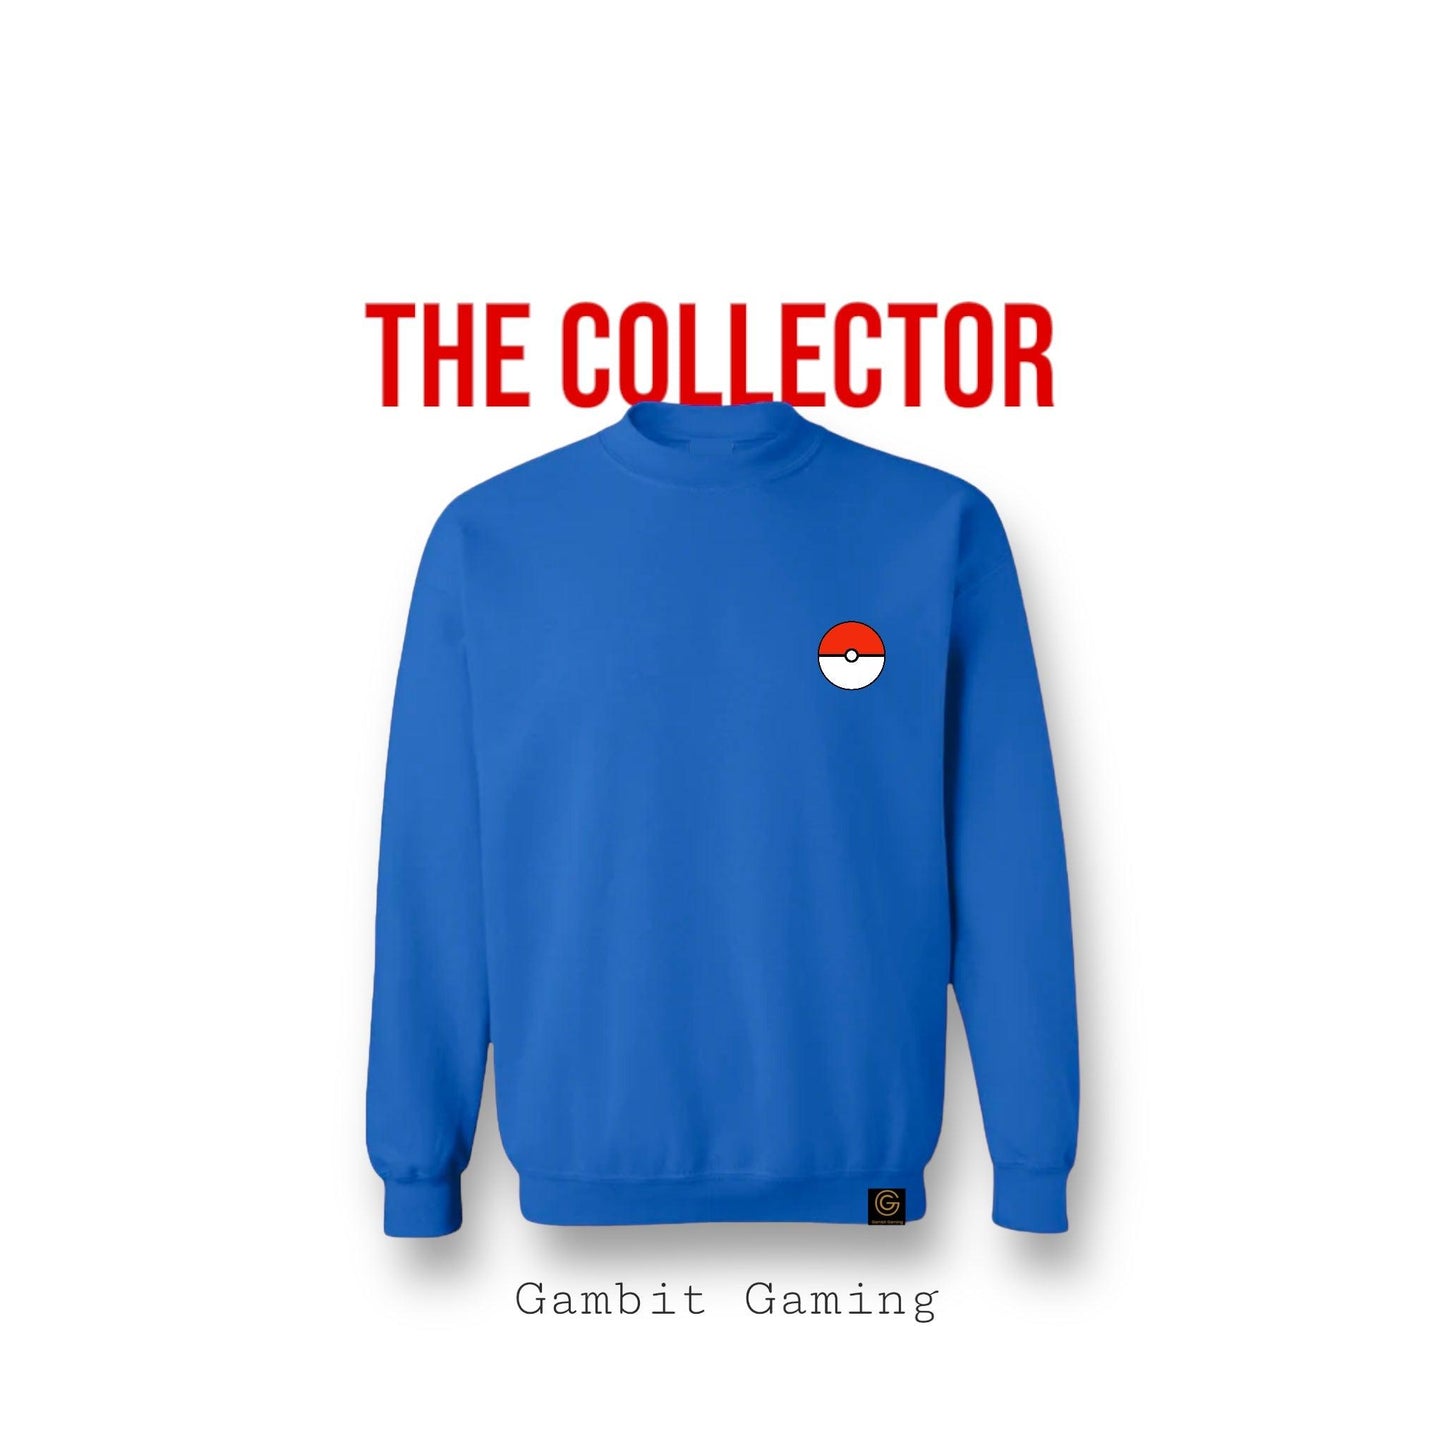 The Collector Sweater - Gambit Gaming